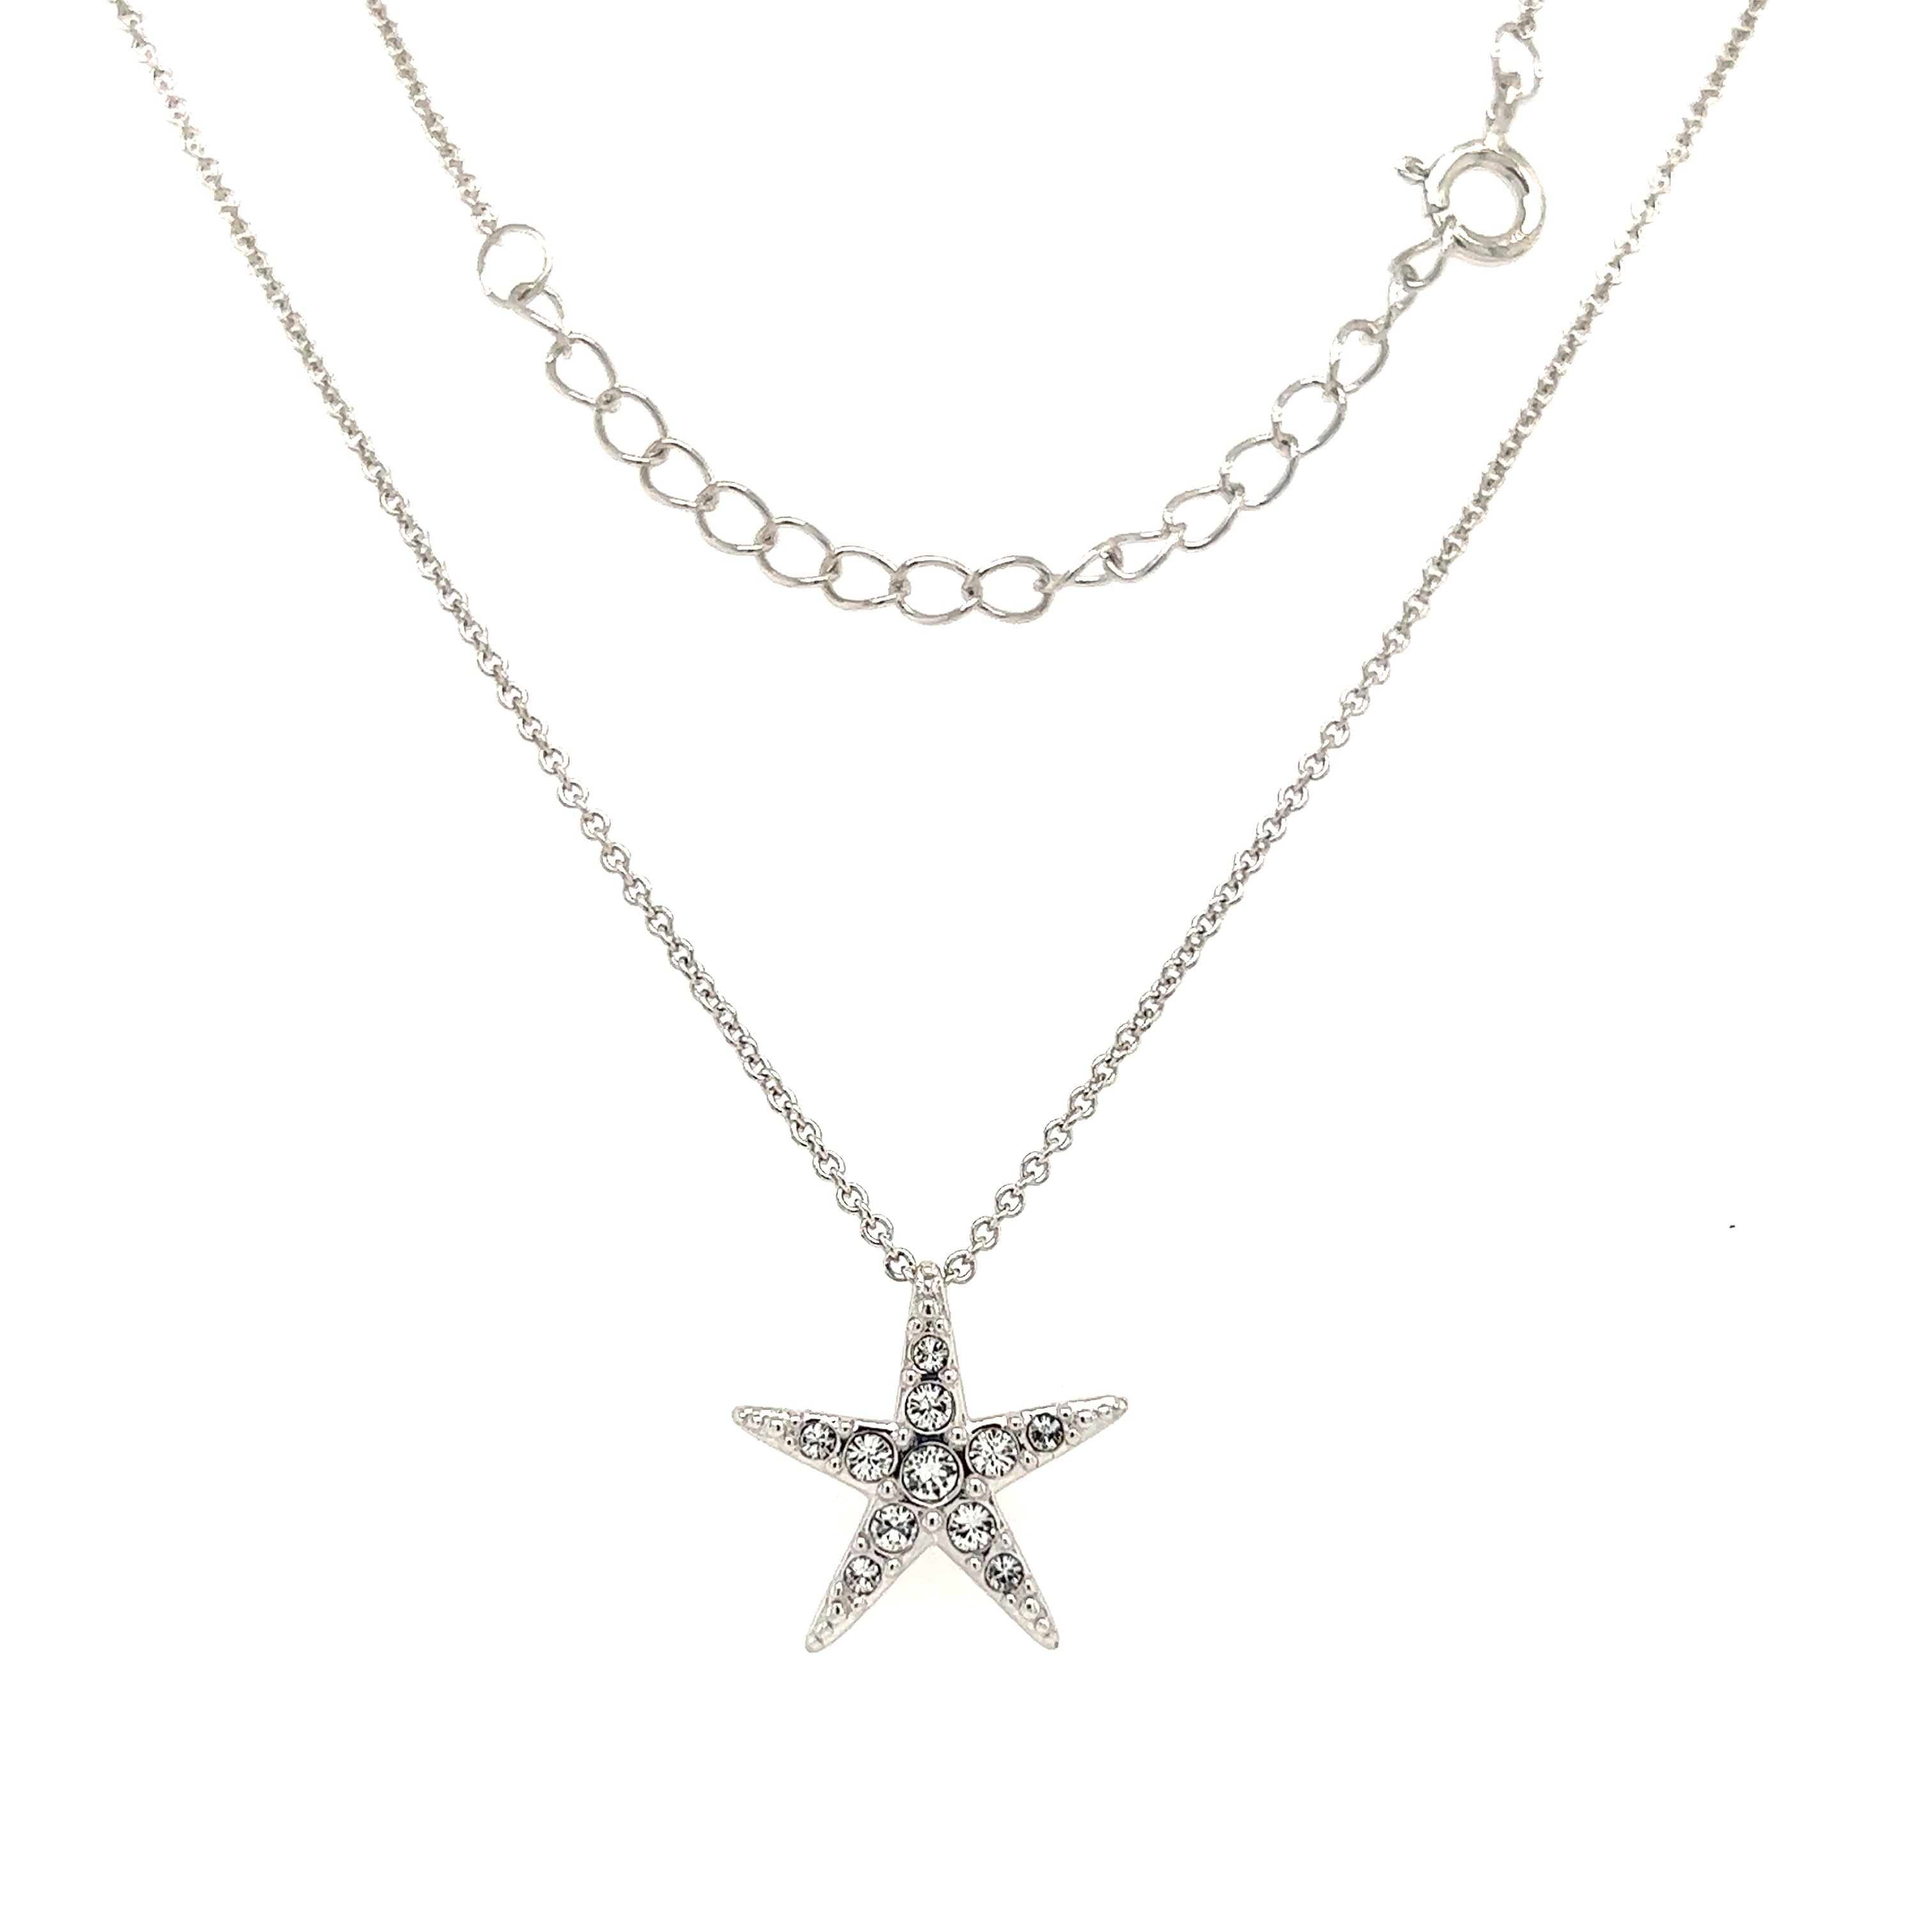 Silver and Gold Starfish Pendant Necklace Delicate Silver Charm Necklace  Symbolic and Meaningful Friendship Necklace Ocean Lover Necklace - Etsy |  Charm necklace silver, Friendship necklaces, Starfish necklace gold